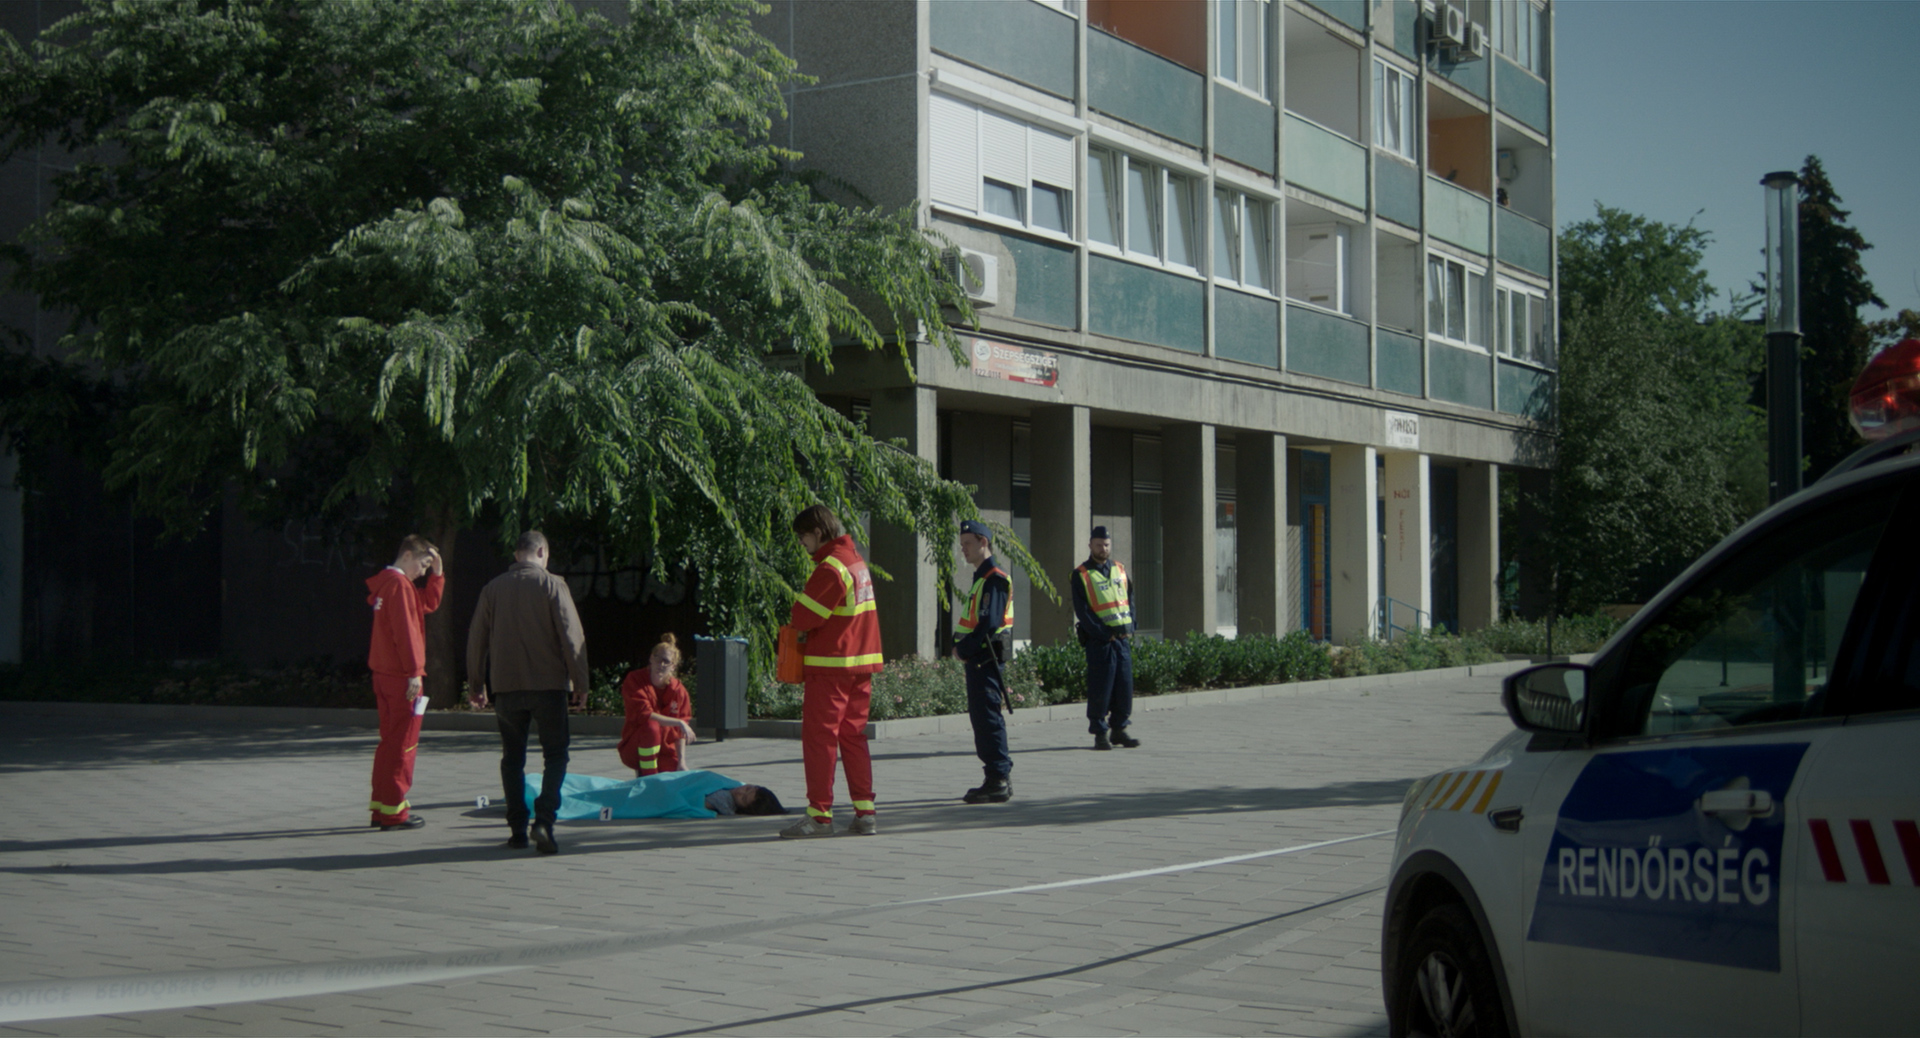 eszter galambos, Still from the short Tiger. Director of Photography, DOP, Cinematographer, operatőr: Eszter Galambos. Director: Péter Hajmási. Colorist: Anna Stalter, Cast: Milán SchruffA dead chinese women is lying on the ground. Medics and the police are looking at her. She is covered with a blue blanket. Police car stops. Still from the movie short Tiger. DOP. : Eszter Galambos  